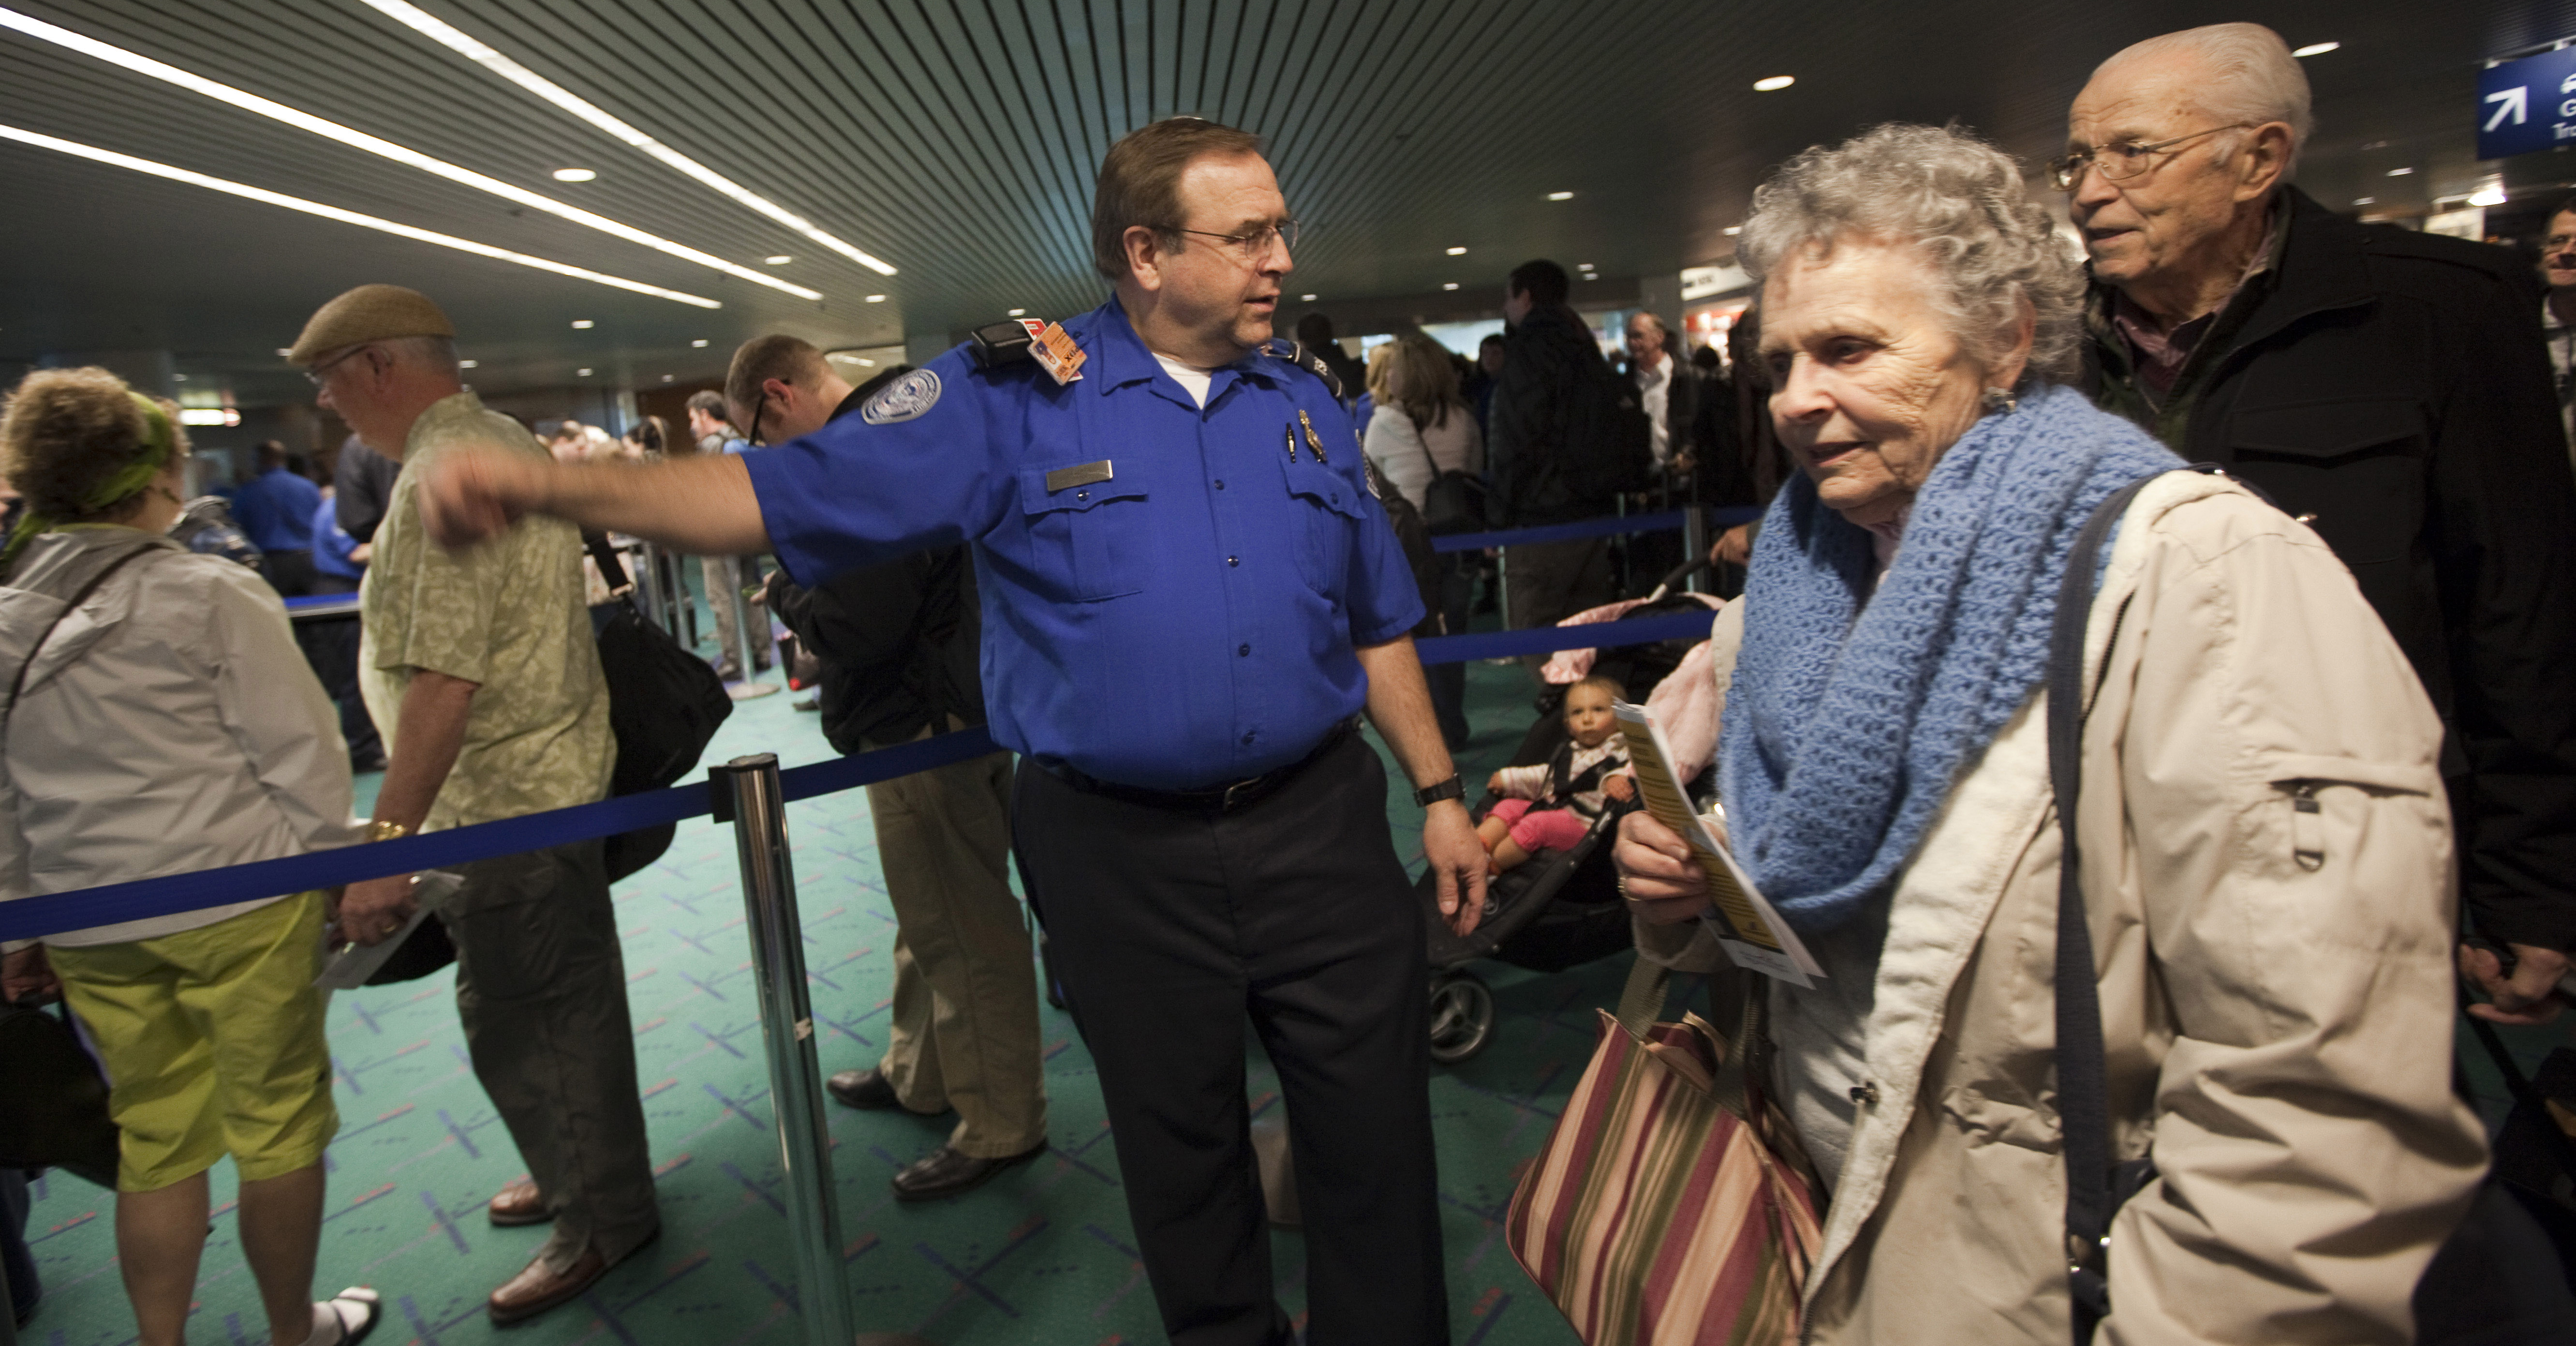 PORTLAND, OR - MARCH 19: A Transportation Security Administration (TSA) officer informs elderly travelers they can now leave their shoes and a light jacket on when passing through airport security at Portland International Airport (PDX) March 19, 2012 in Portland, Oregon. The TSA has modified screening procedures for passengers 75 and older and was implemented at four airports nationwide as a part of a pilot program. (Photo by Natalie Behring/Getty Images)